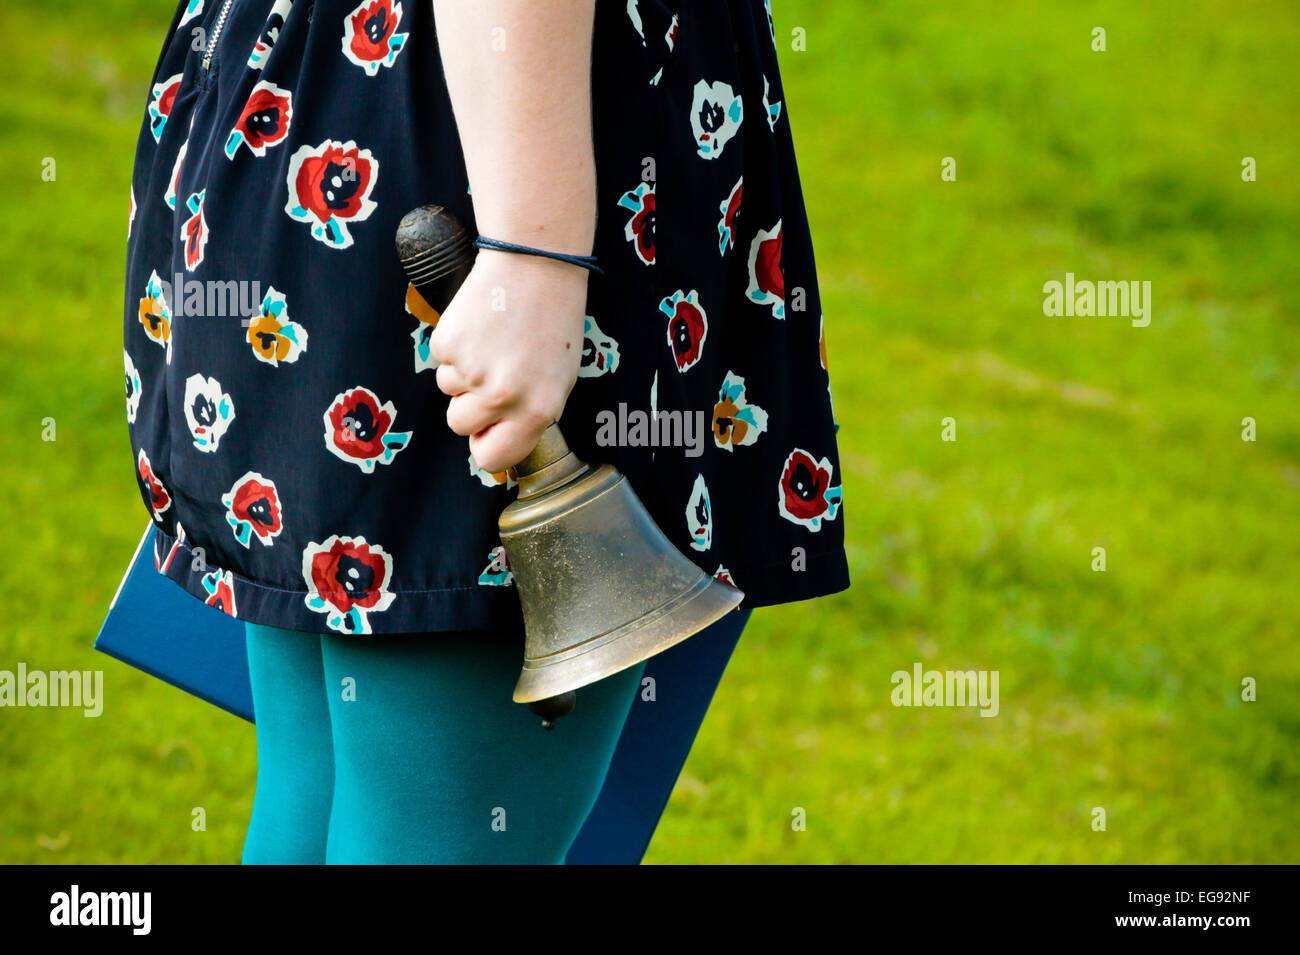 Female school teacher holding a traditional hand bell rung to mark the end of lessons and play time in a primary school in UK Stock Photo